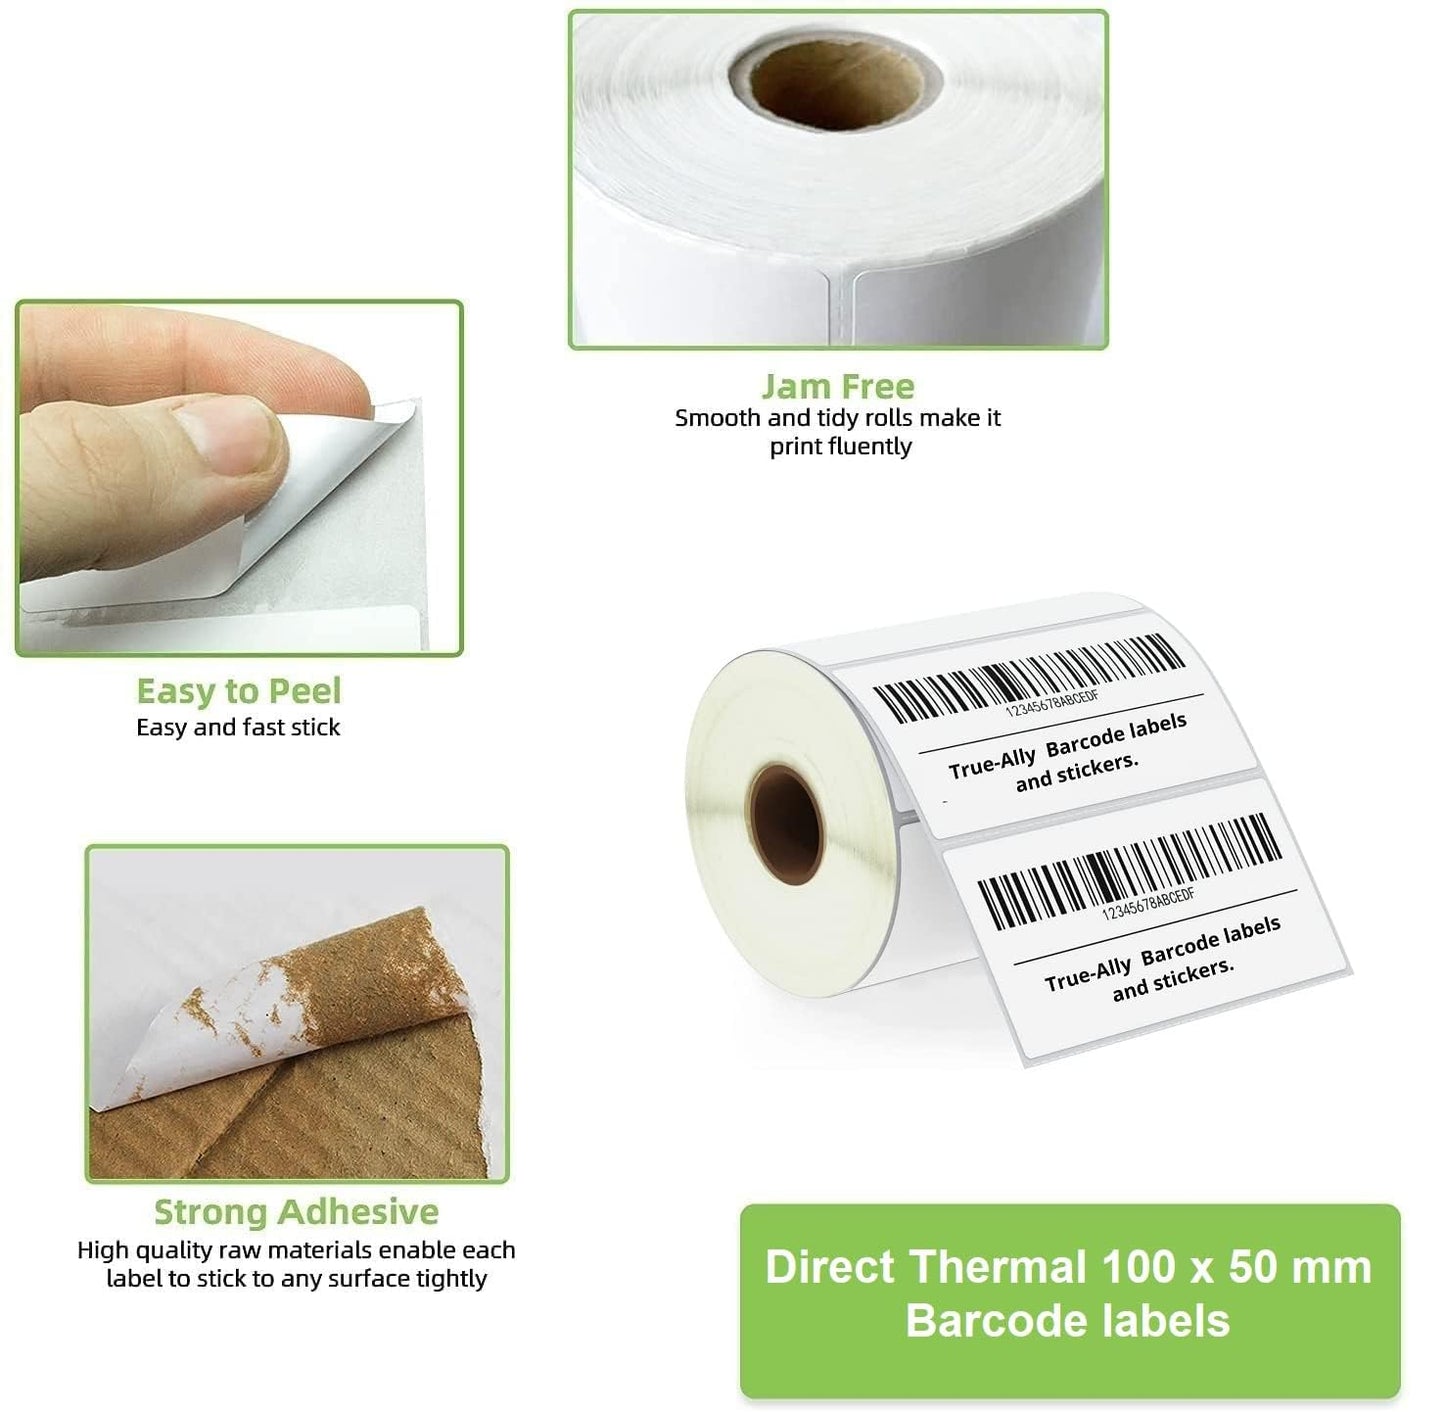 KIYA 75X25 Barcode Label Sticker  - 75mm x 25mm - 1 Ups - 1000 Labels Per Roll - White Self Adhesive Sticker for Printing Barcoding (1 Roll Per Pack (1000 Labels))